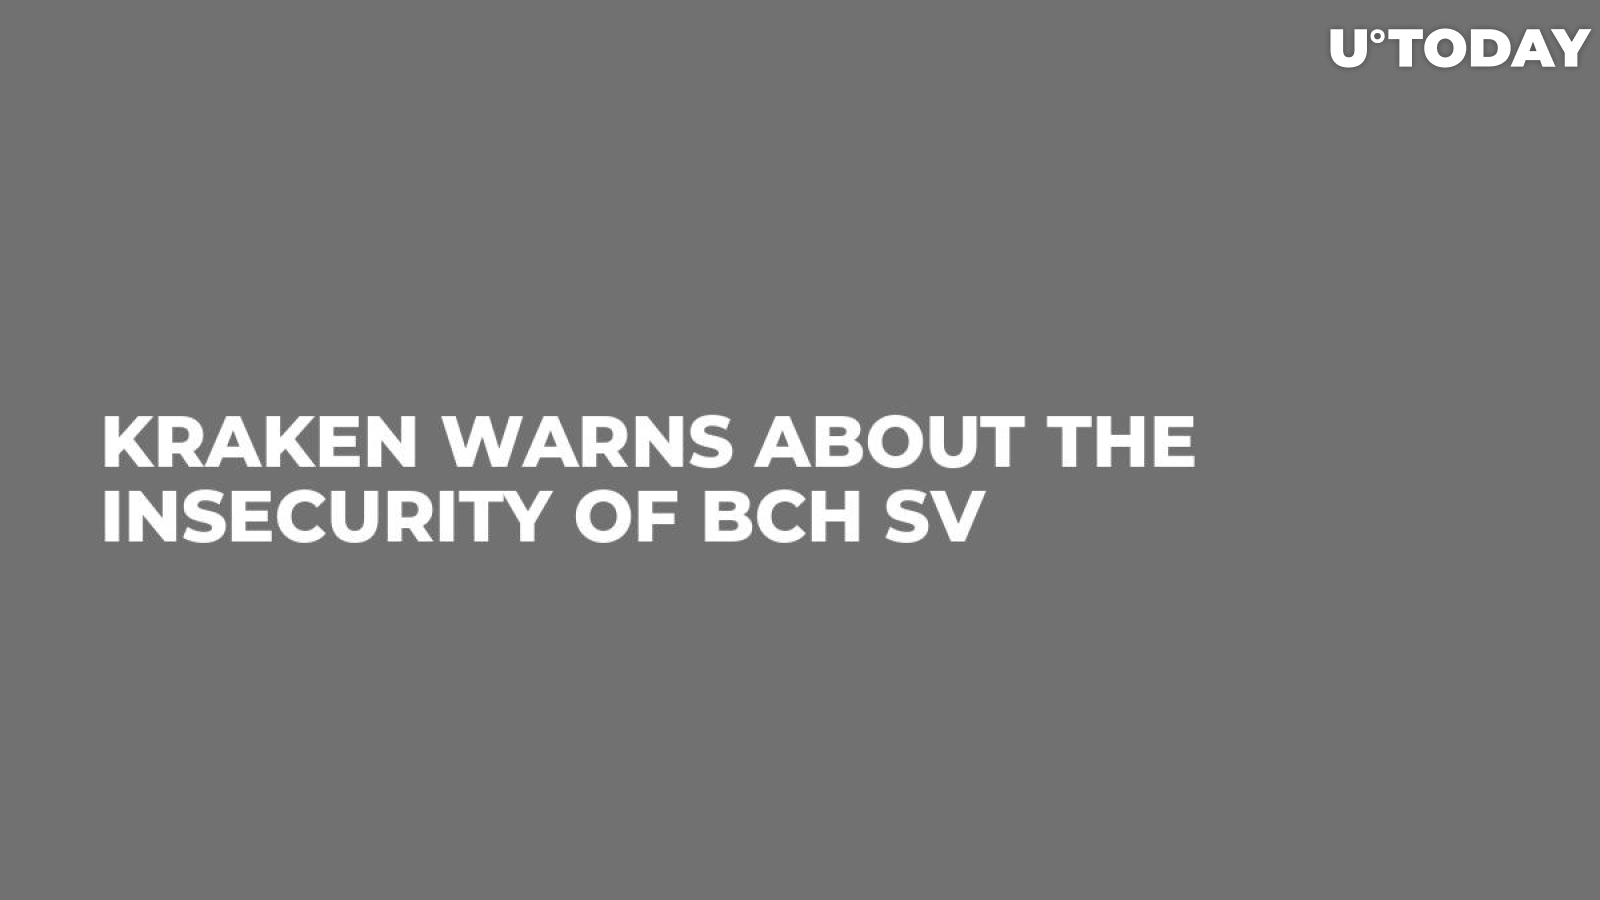 Kraken Warns About the Insecurity of BCH SV